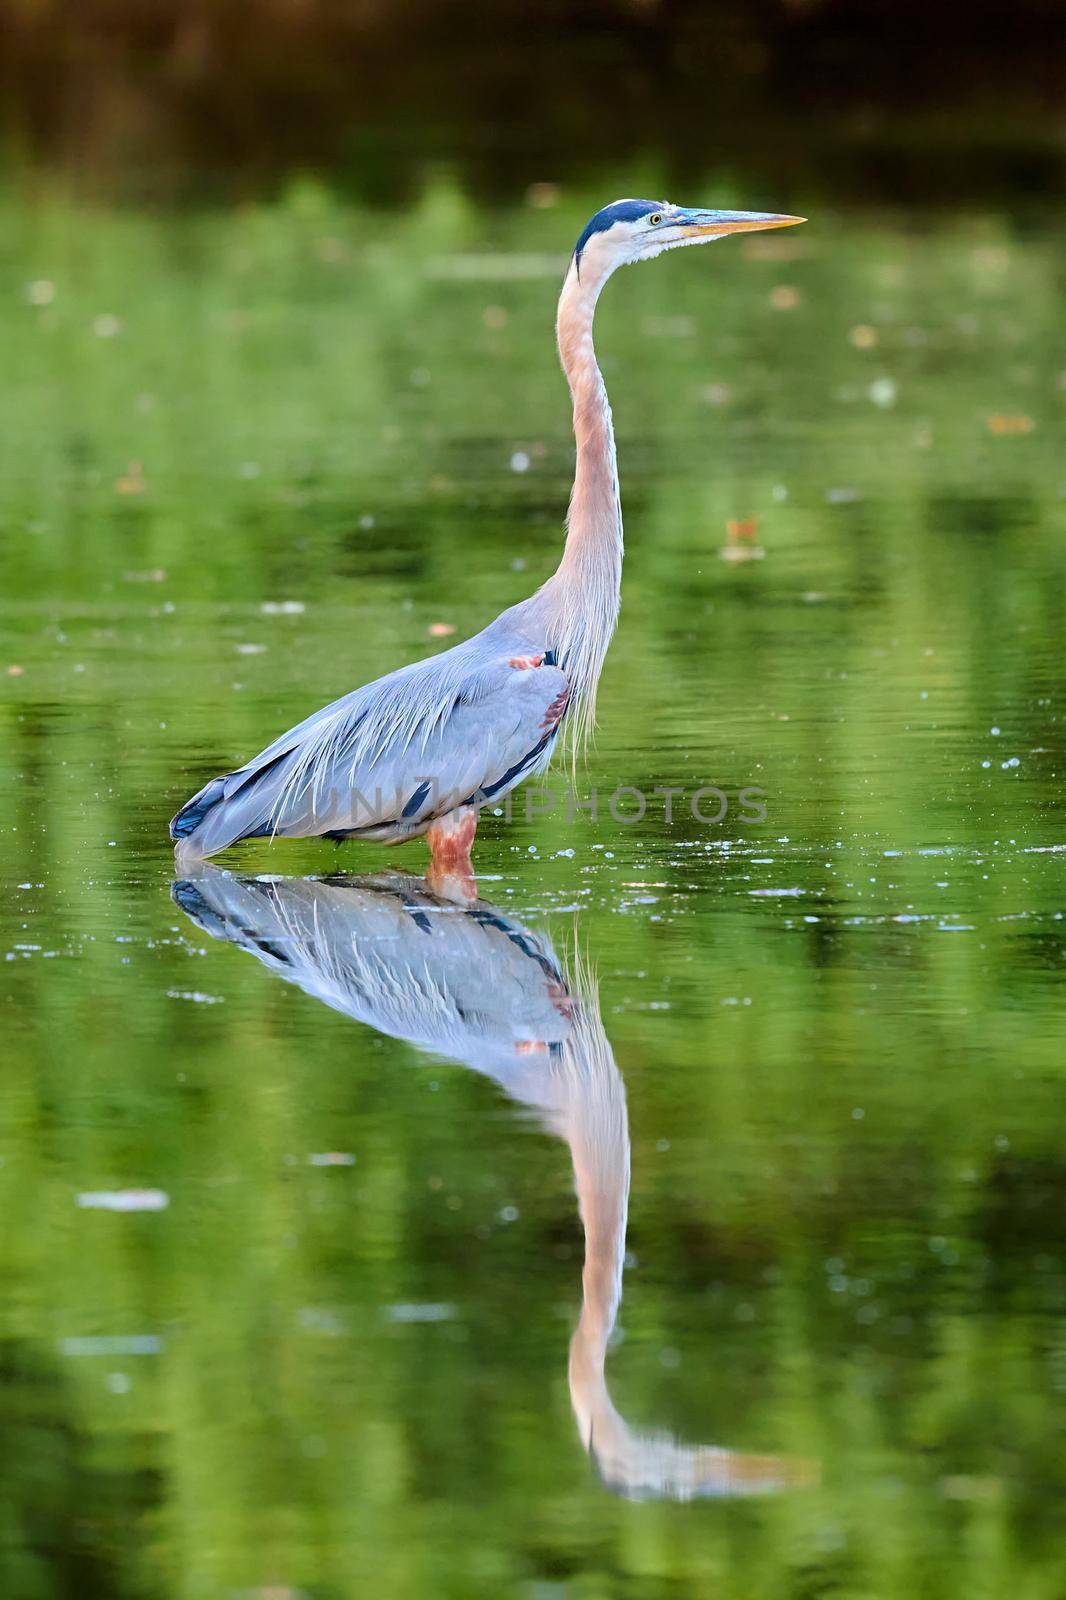 Great Blue Heron standing in shallow water hunting for fish. by patrickstock